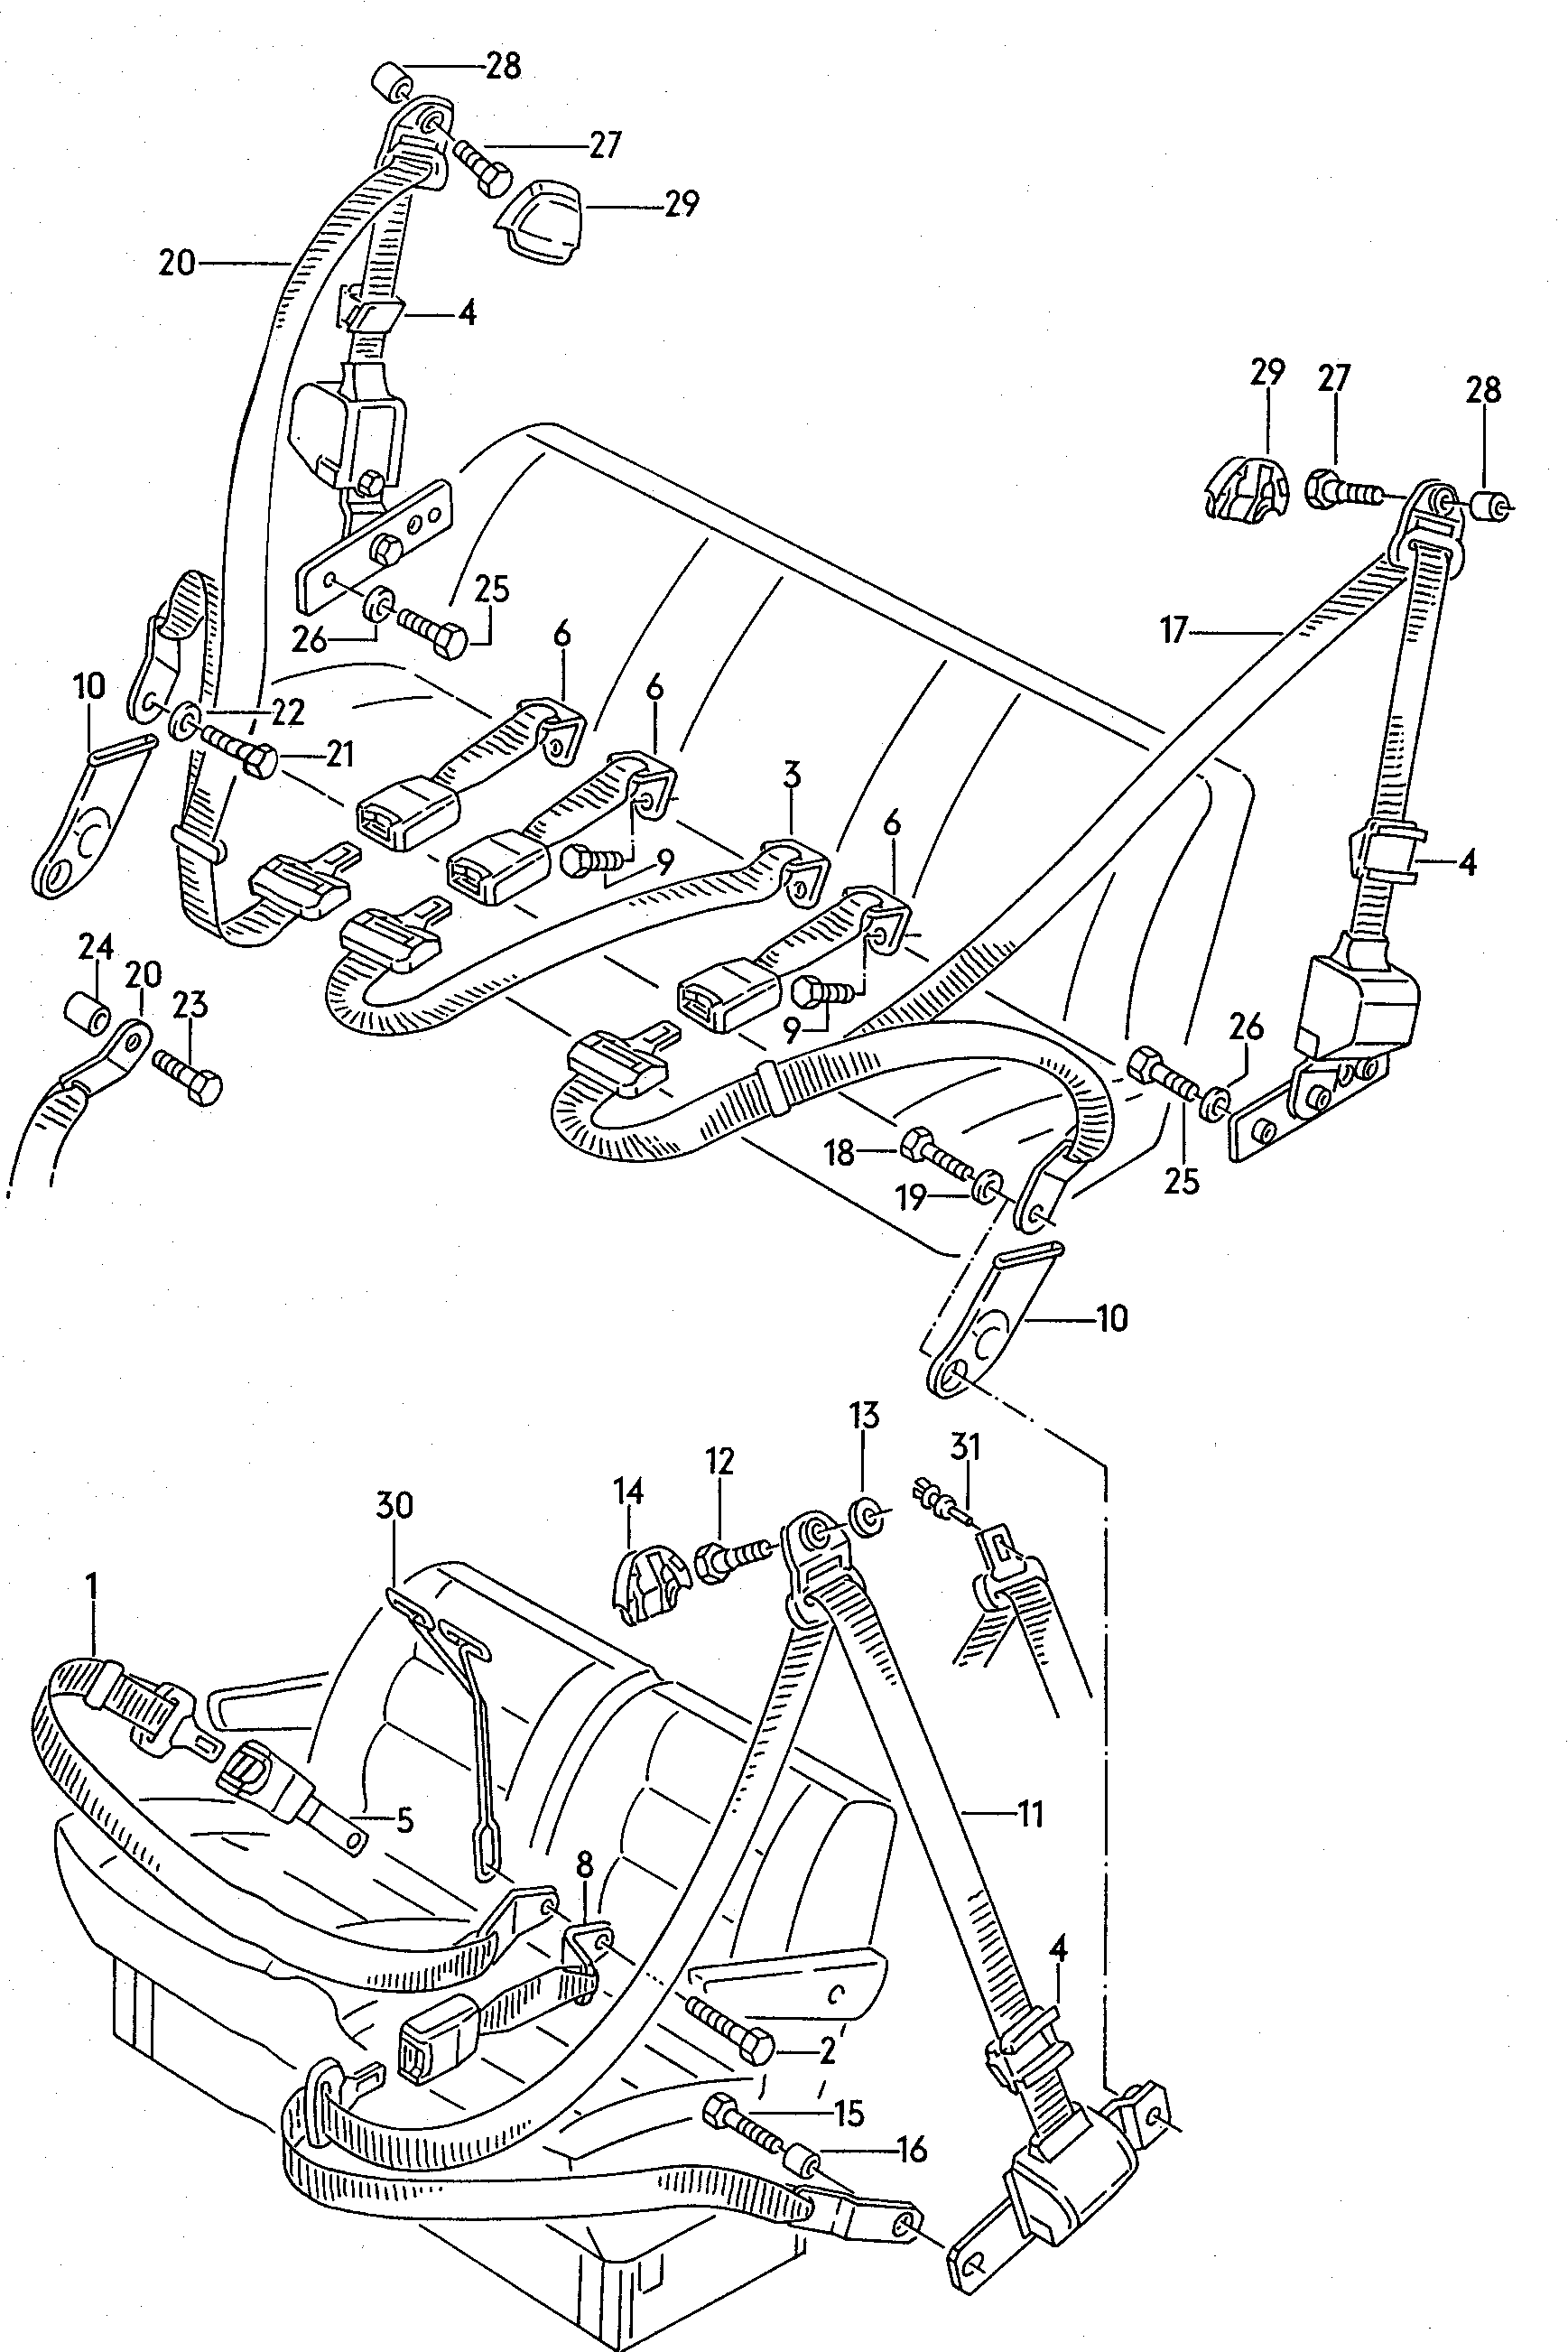 three-point seat belt in<br>passenger compartmentLap beltfor vehicles with 3-seat<br>foldable bench seat, rear, and<br>2-seat, foldable backrest<br>for front bench seat  - Vanagon syncro - vasy